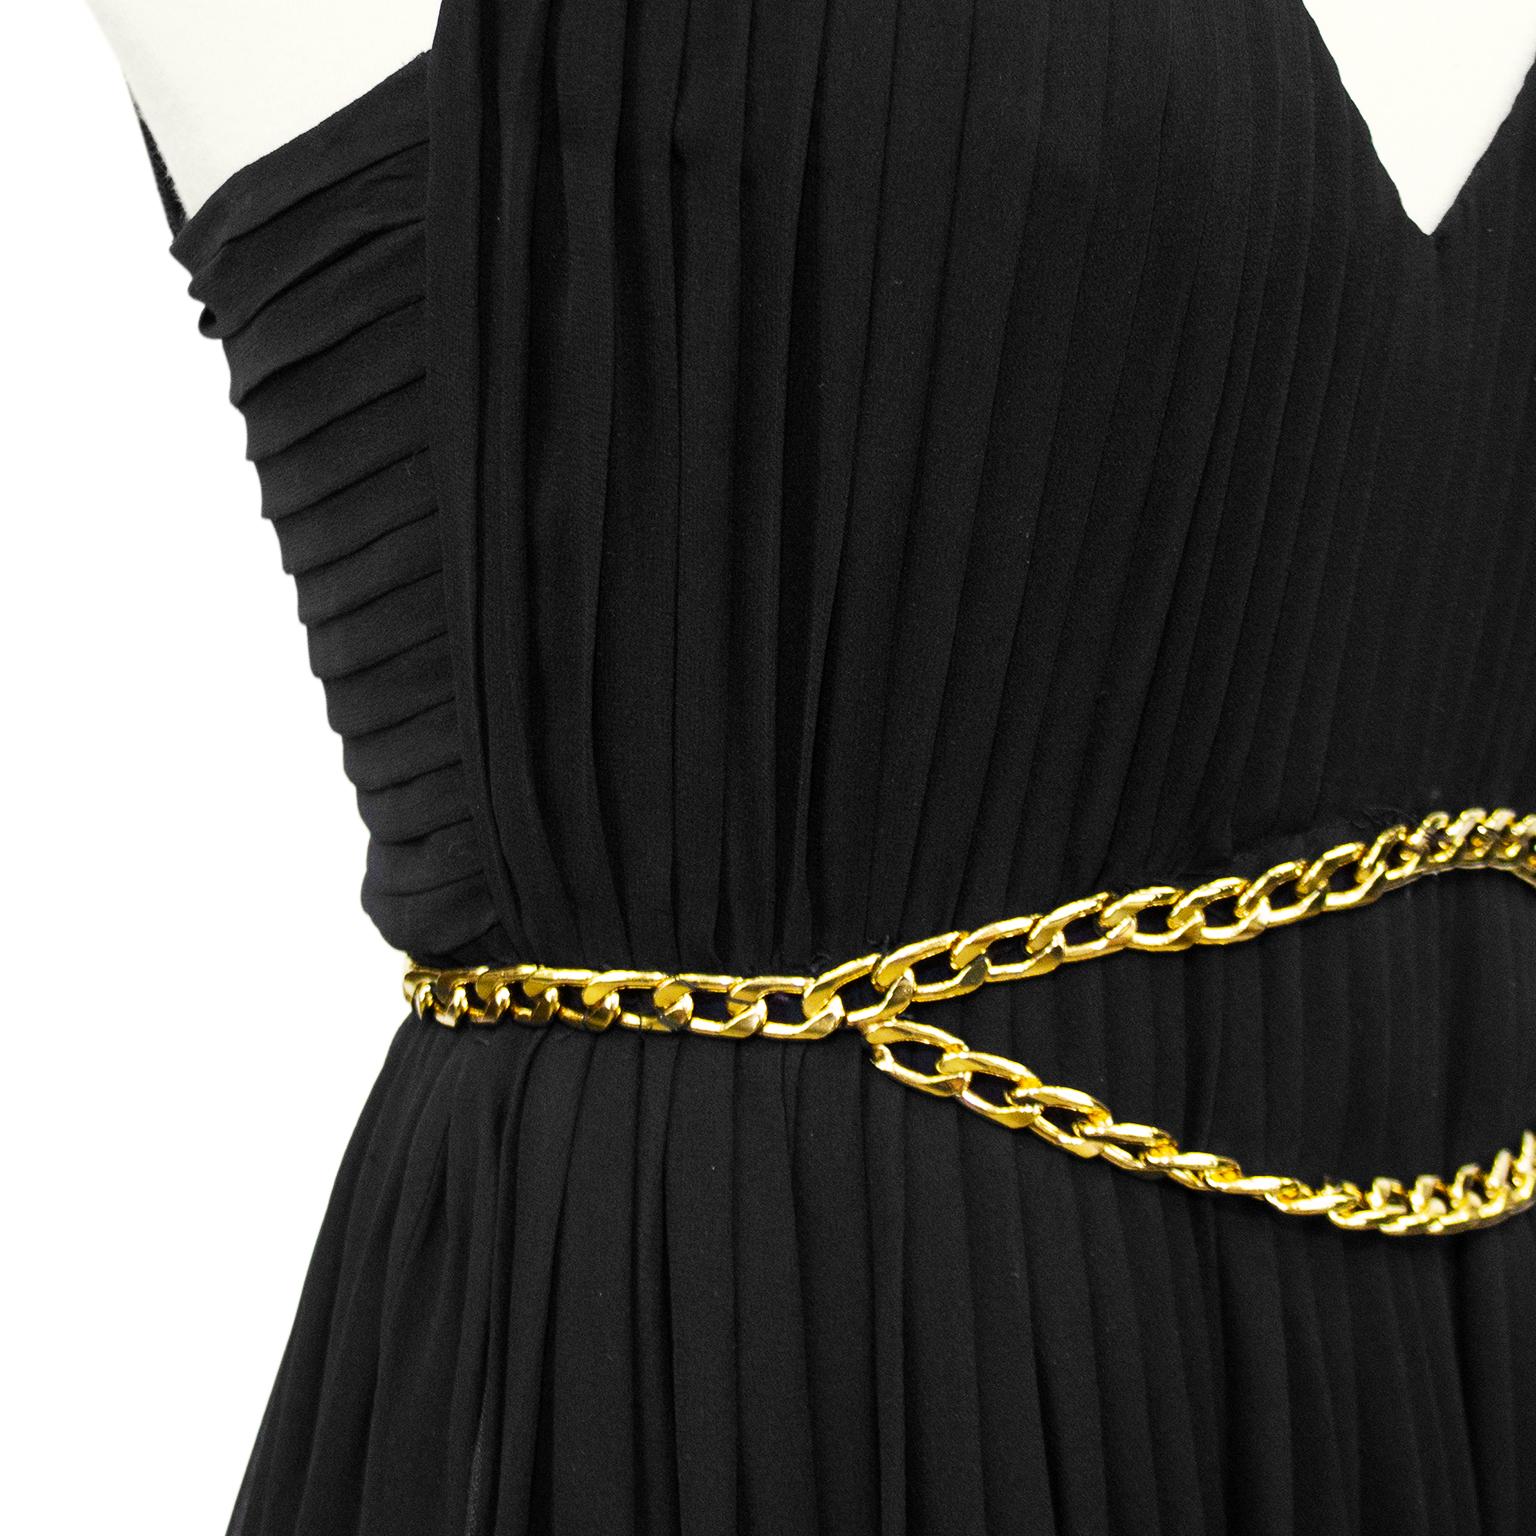 Women's 1990s Chanel Collection 18 Black Chiffon Gown with Gold Chain Belt  For Sale